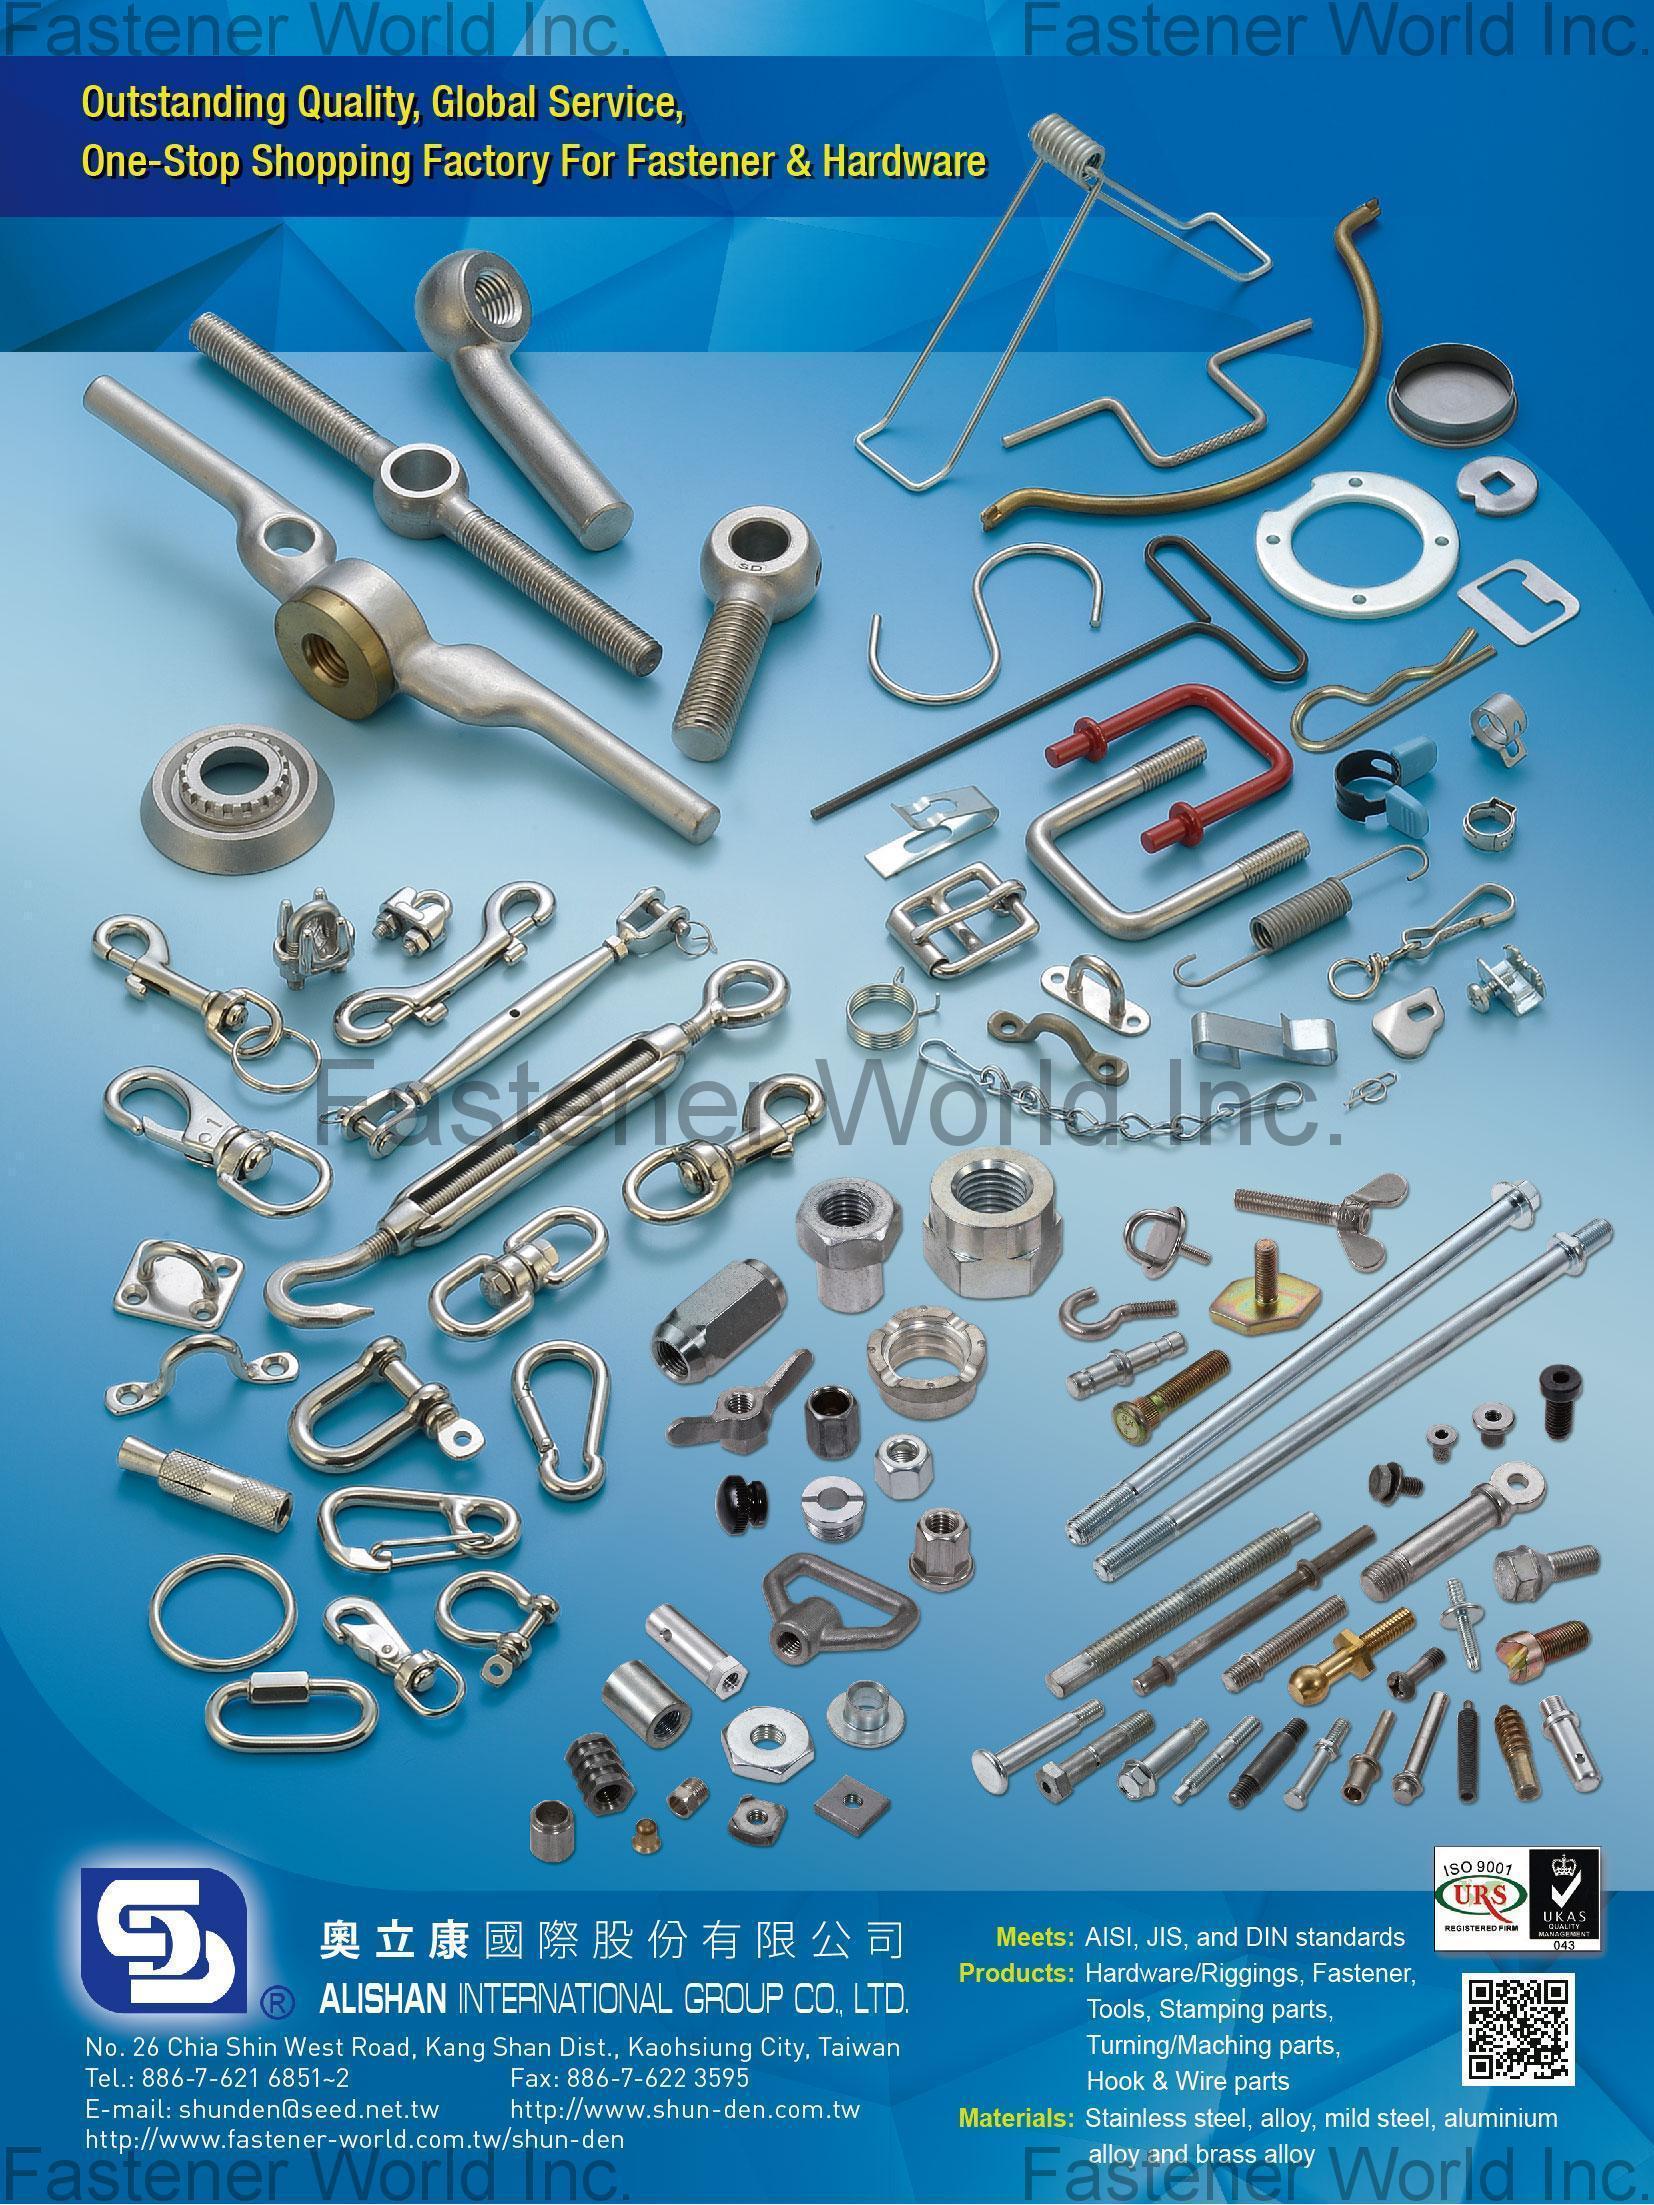 Bit & Bits Sets Fastener tools, Bolts & Screws, Nuts, Link Chains & Steel Wire Rope products, Turning & Cutting parts, Stamping parts, Hardware & Rigging, Casting & Forging parts, Wrought (Forged)-Products